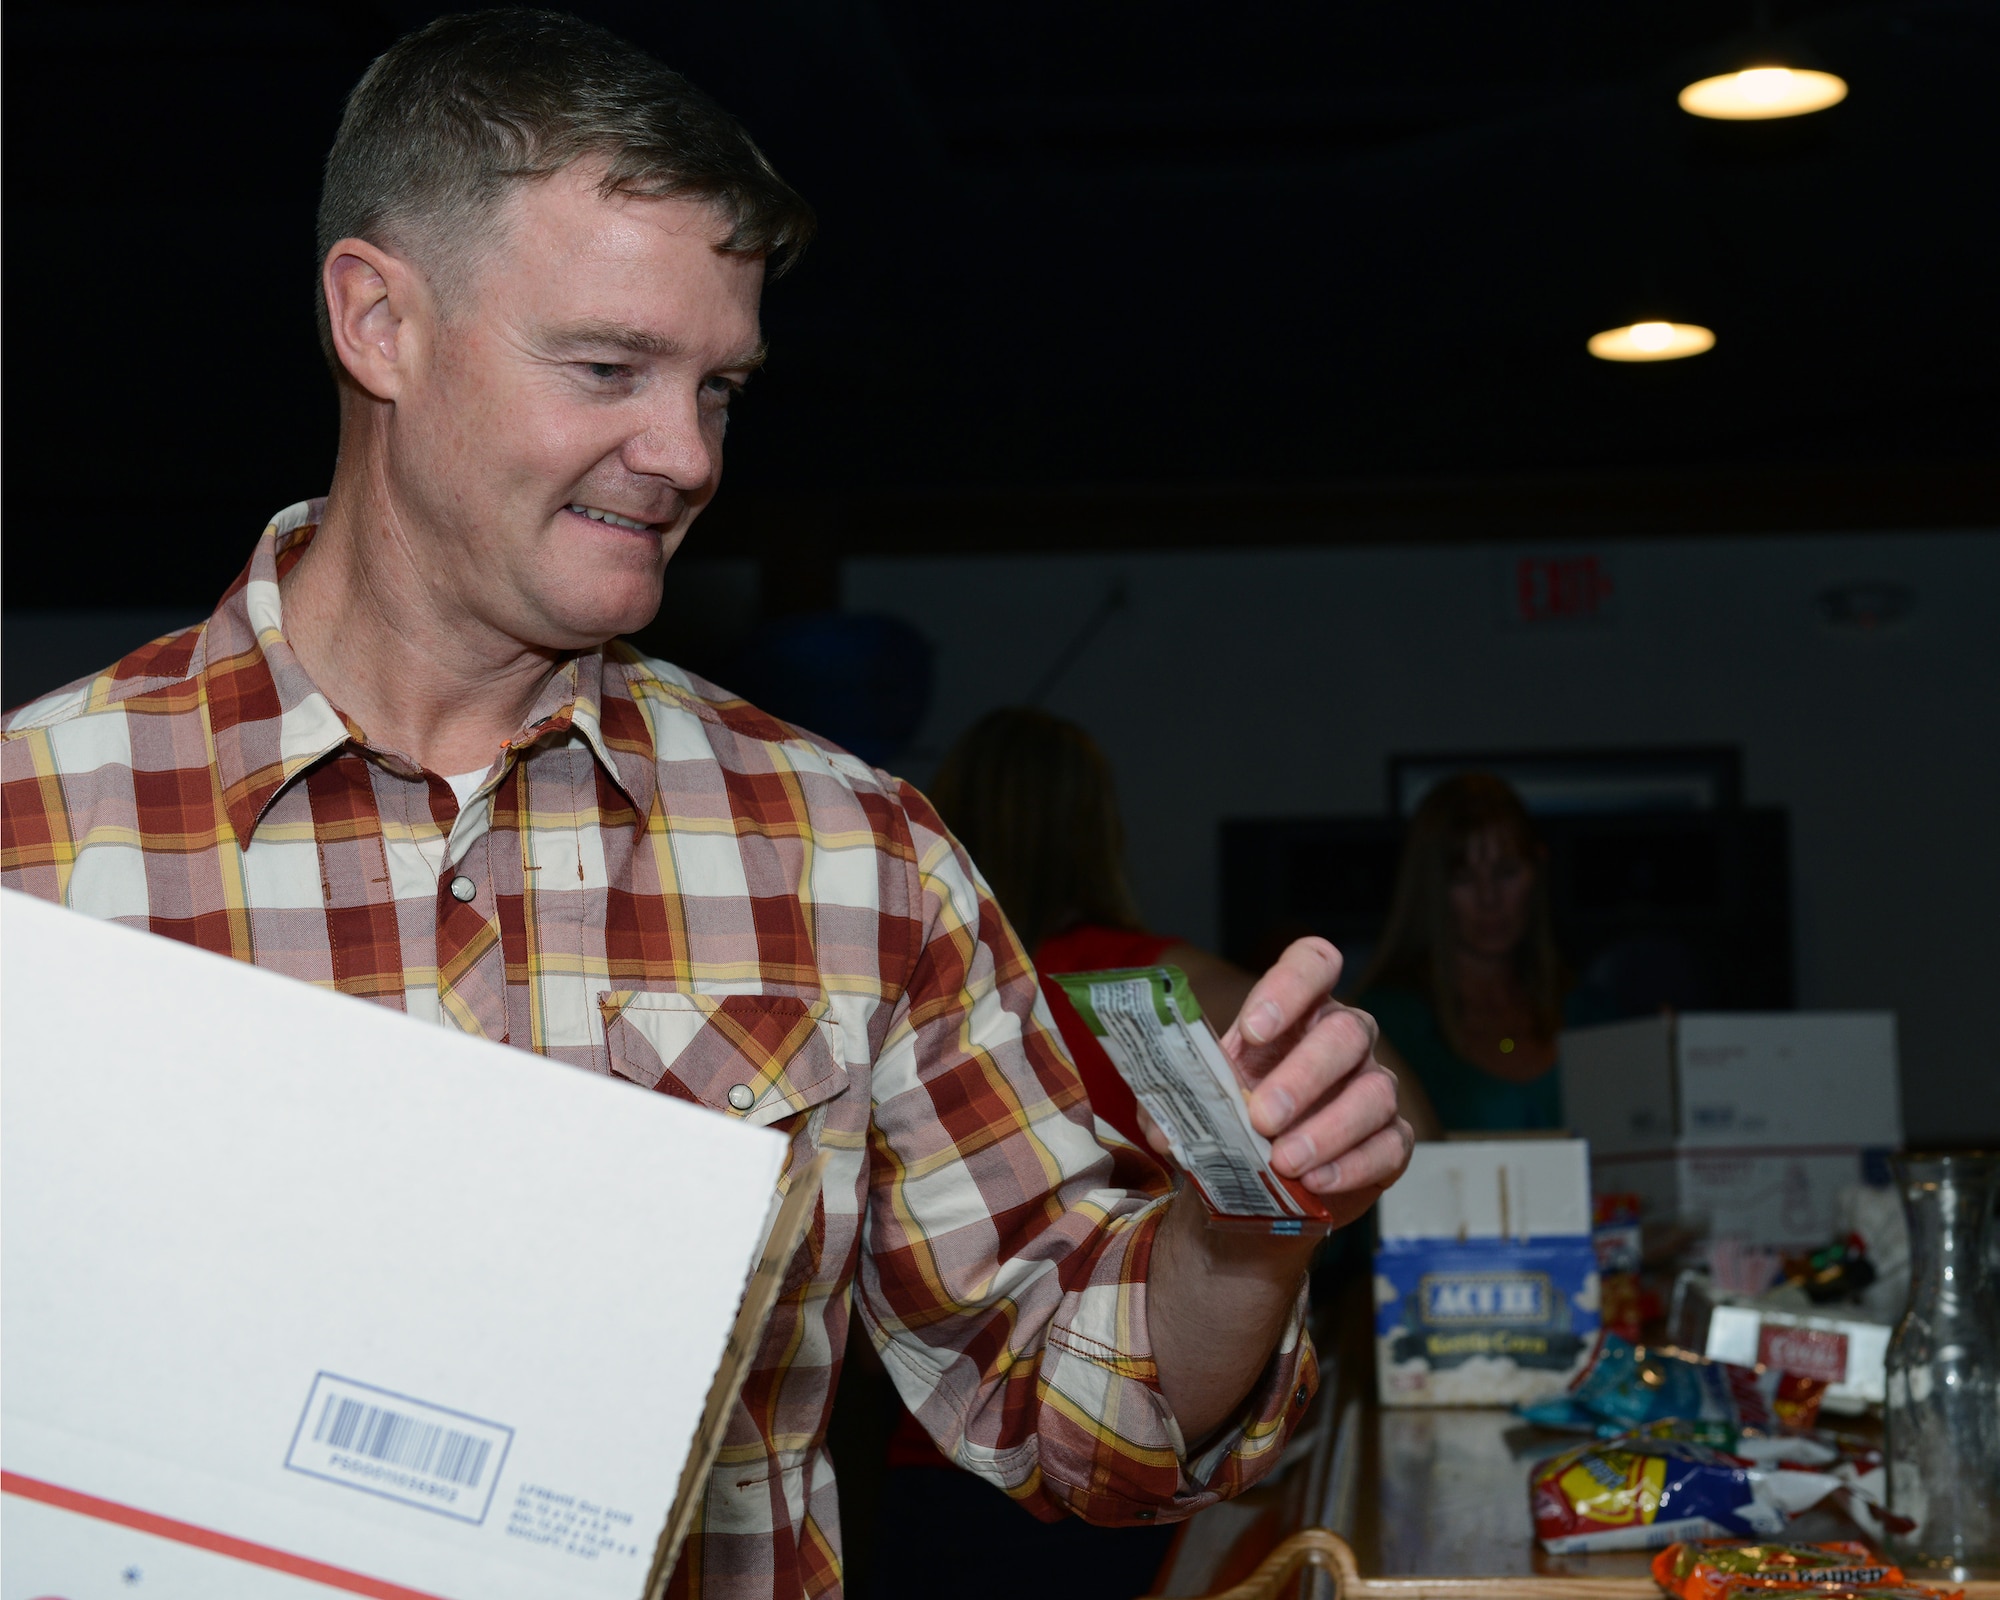 Col. Thomas Shank, 47th Flying Training Wing commander, fills a box with snacks and hygiene items at Laughlin Air Force Base, Texas, Dec. 10, 2015. Thirteen packages were put together to support “Operation Spoil the Deployer” to raise morale of Laughlin’s deployed service members. (U.S. Air Force photo by Senior Airman Jimmie D. Pike)